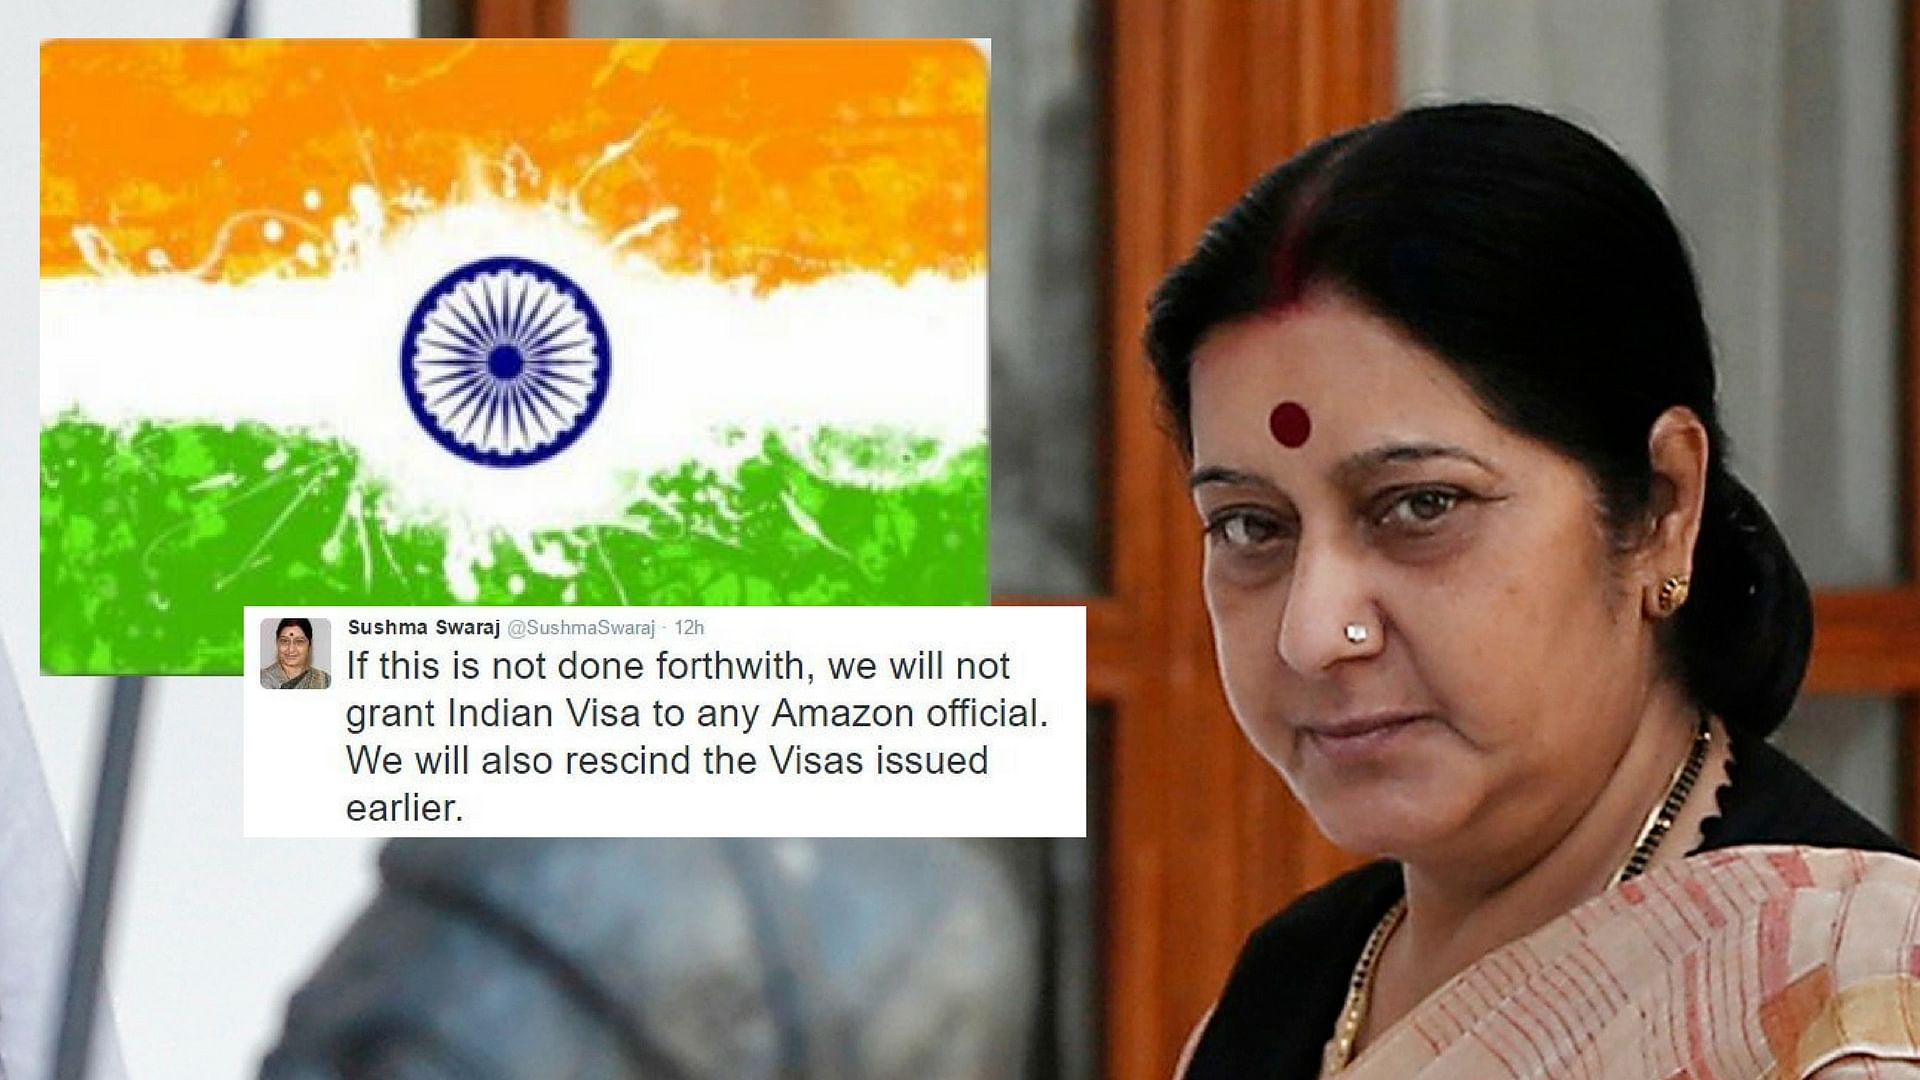 Sushma Swaraj,  External Affairs Minister, India. (Photo: <b>Altered by The Quint</b>)